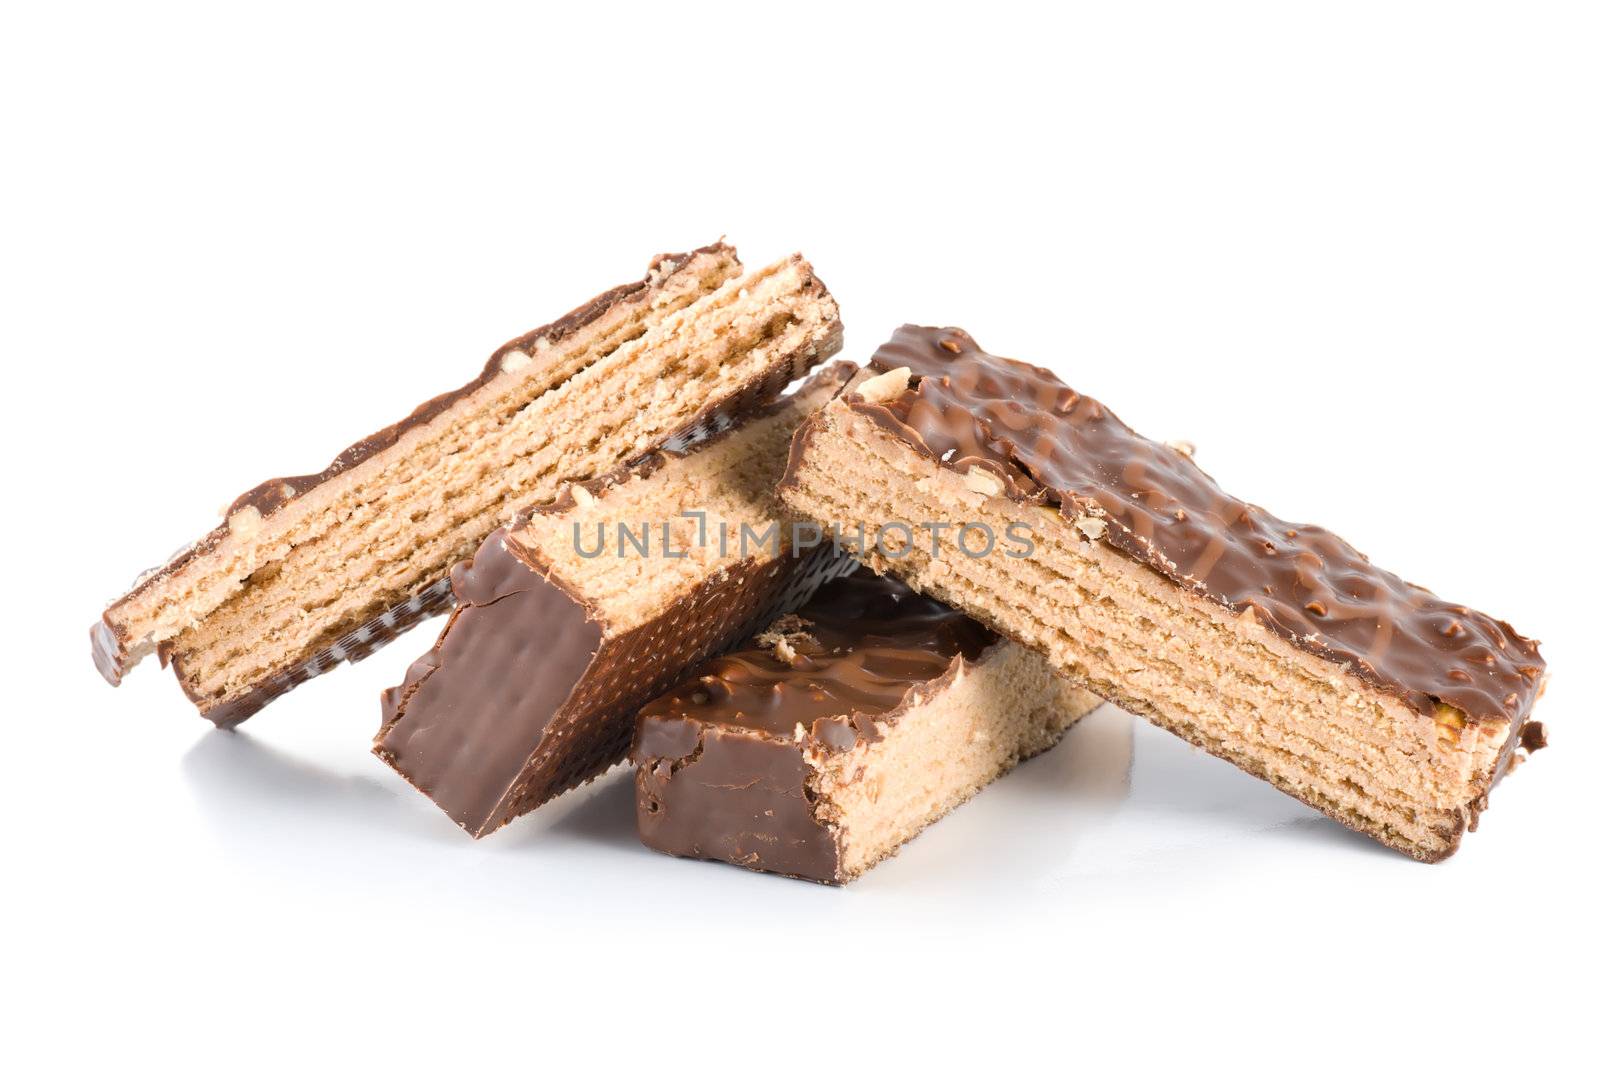 Chocolate bar isolated on a white background